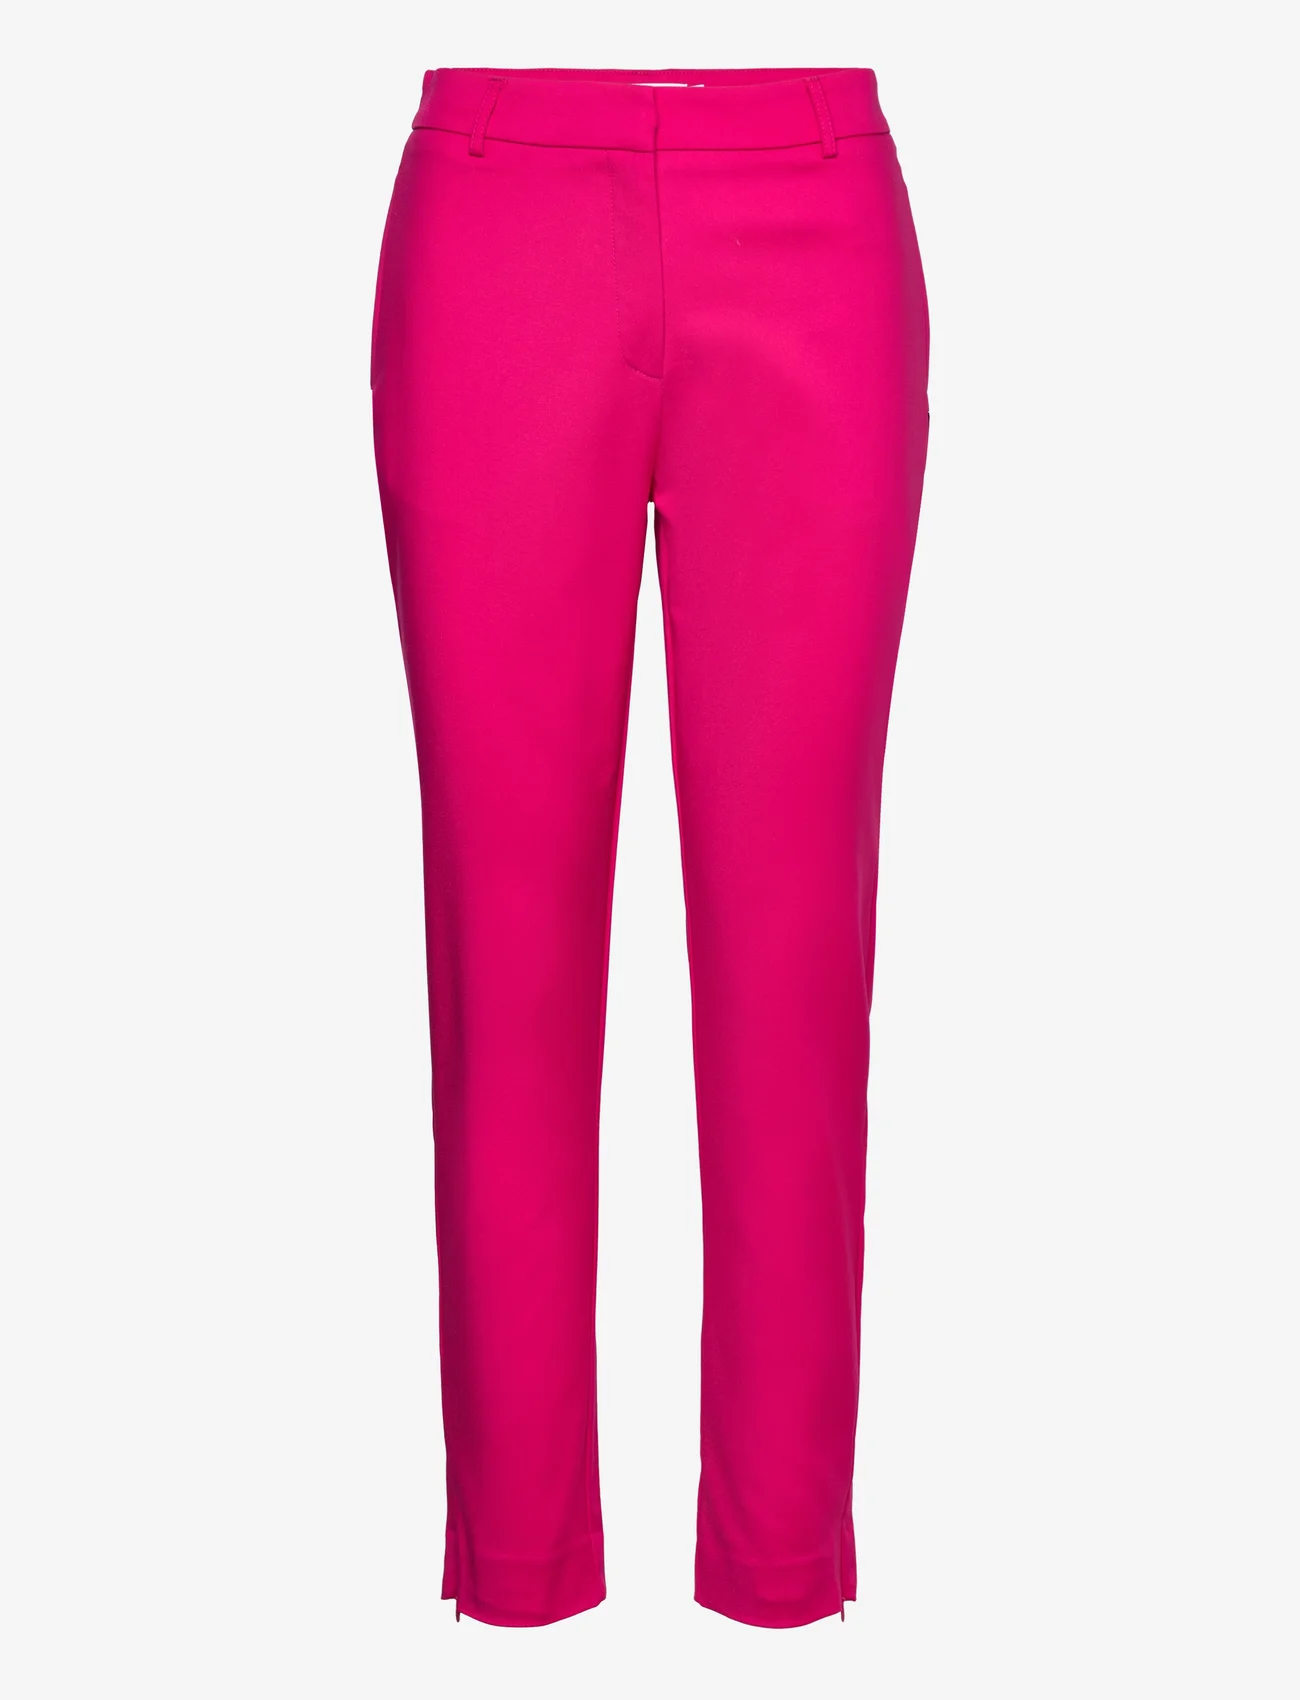 Coster Copenhagen - Tapered pants - Stella fit - slim fit trousers - raspberry pink - 0